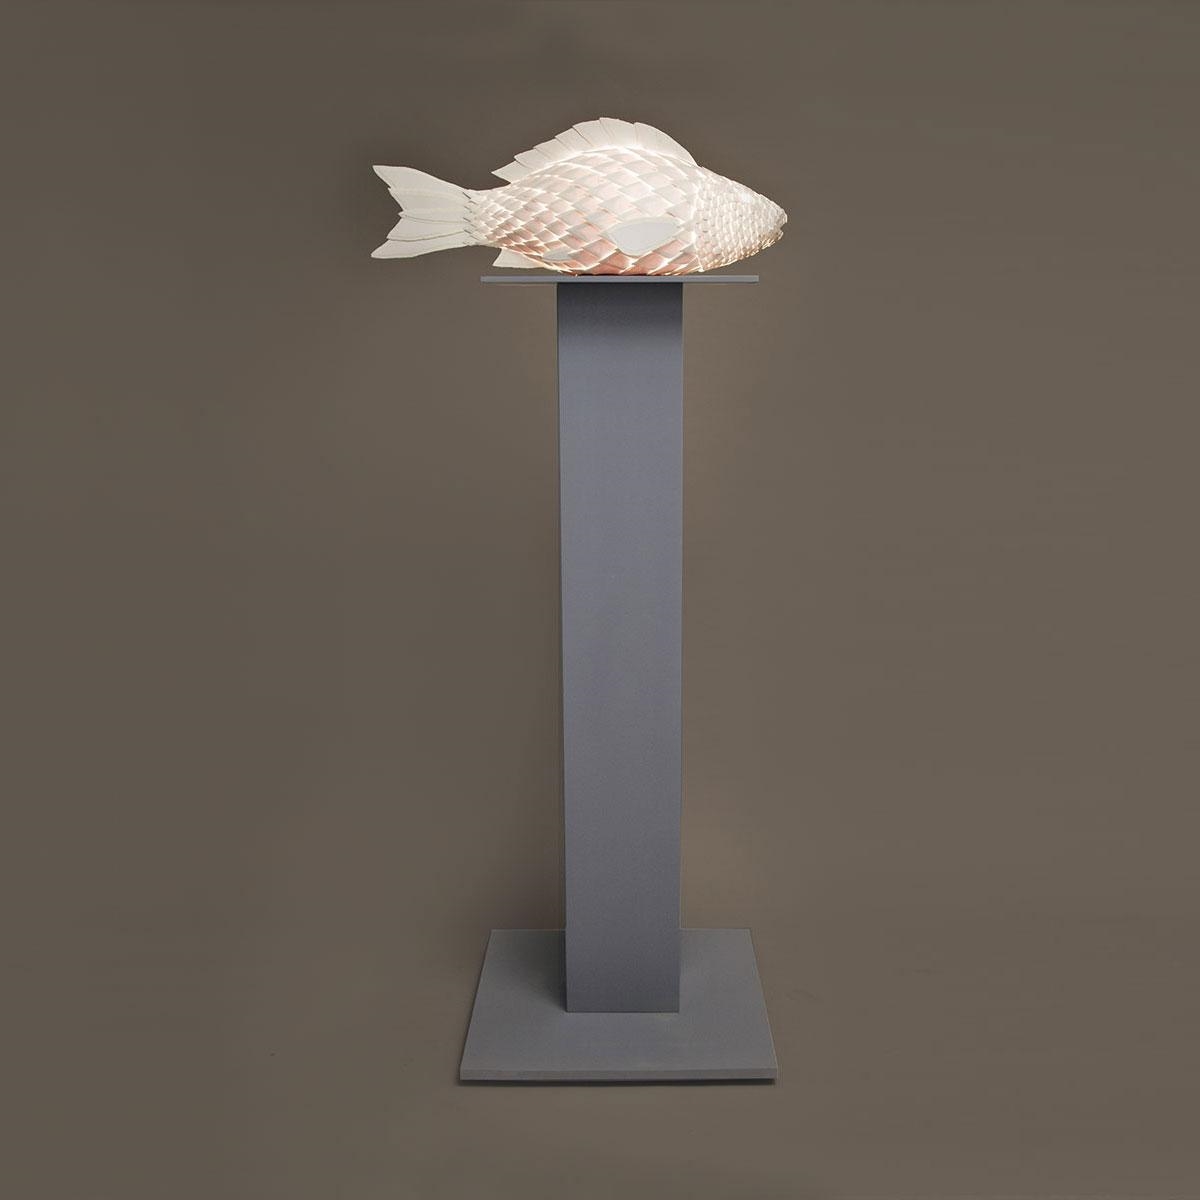 Gehry 'Fish Lamp' Up For Auction - SmartGlass